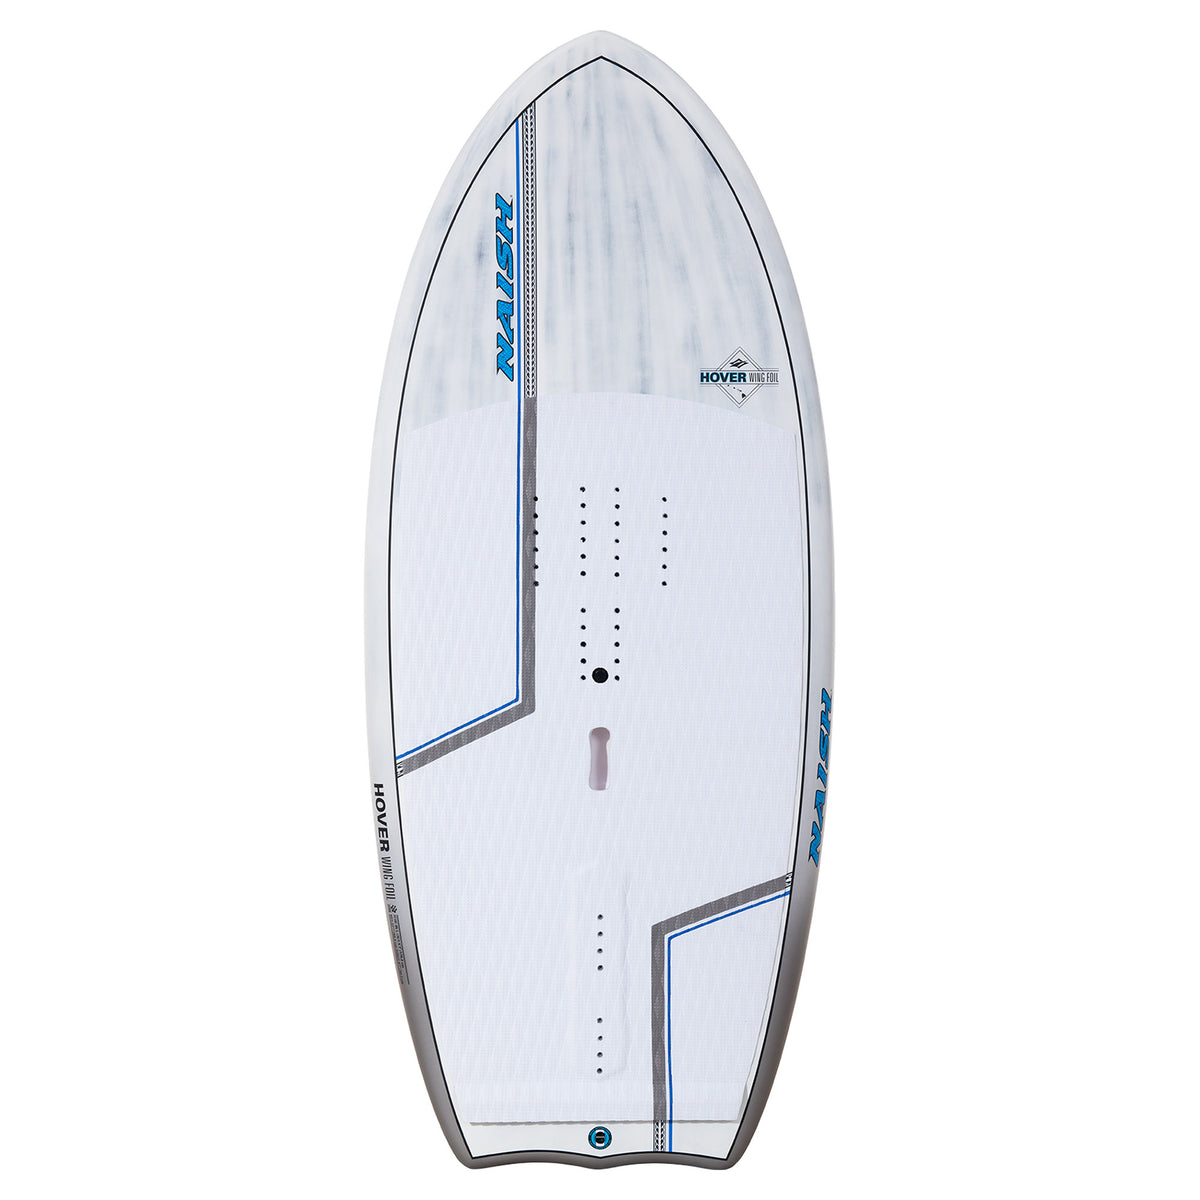 NAISH WING FOIL HOVER ULTRA wing foil board